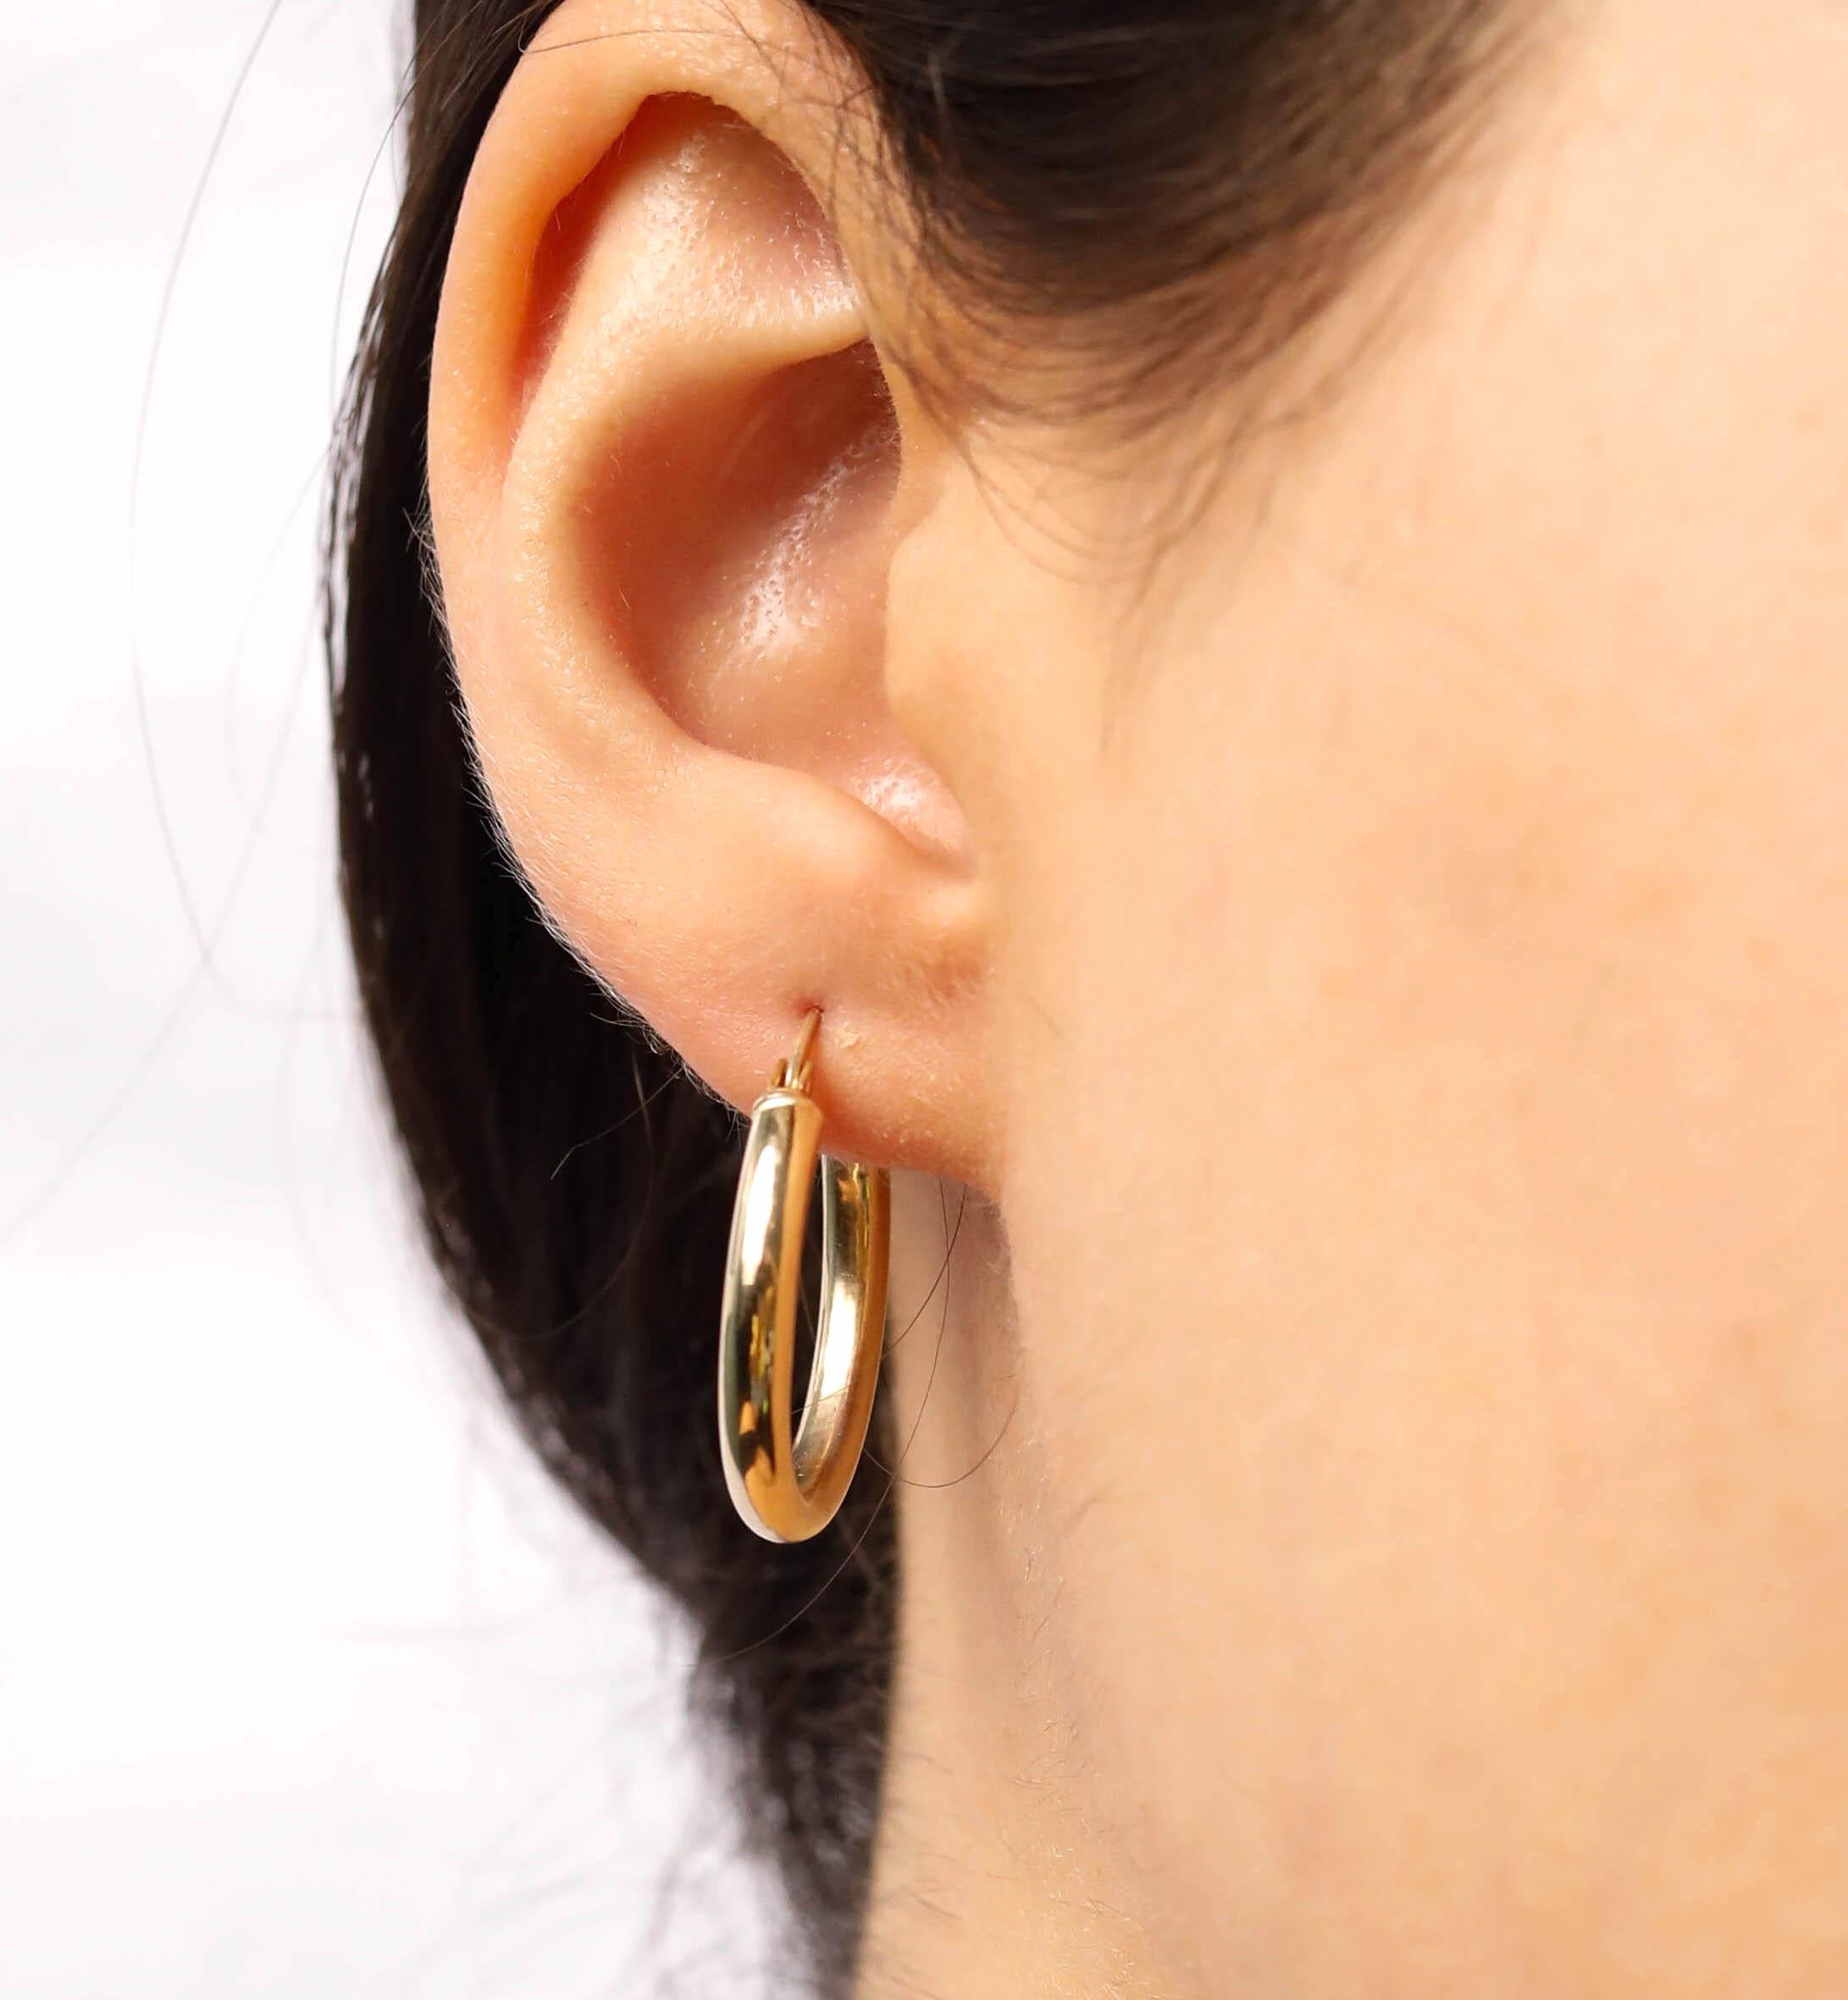  14 Karat Yellow Gold Tube Hoop Earrings

These delicate hoop earrings are crafted in solid 14 karat yellow gold. Modeled after traditional jewelry, these hoop earrings are with tube Design take on the classic gold hoop.

Metal Color: Yellow
Metal